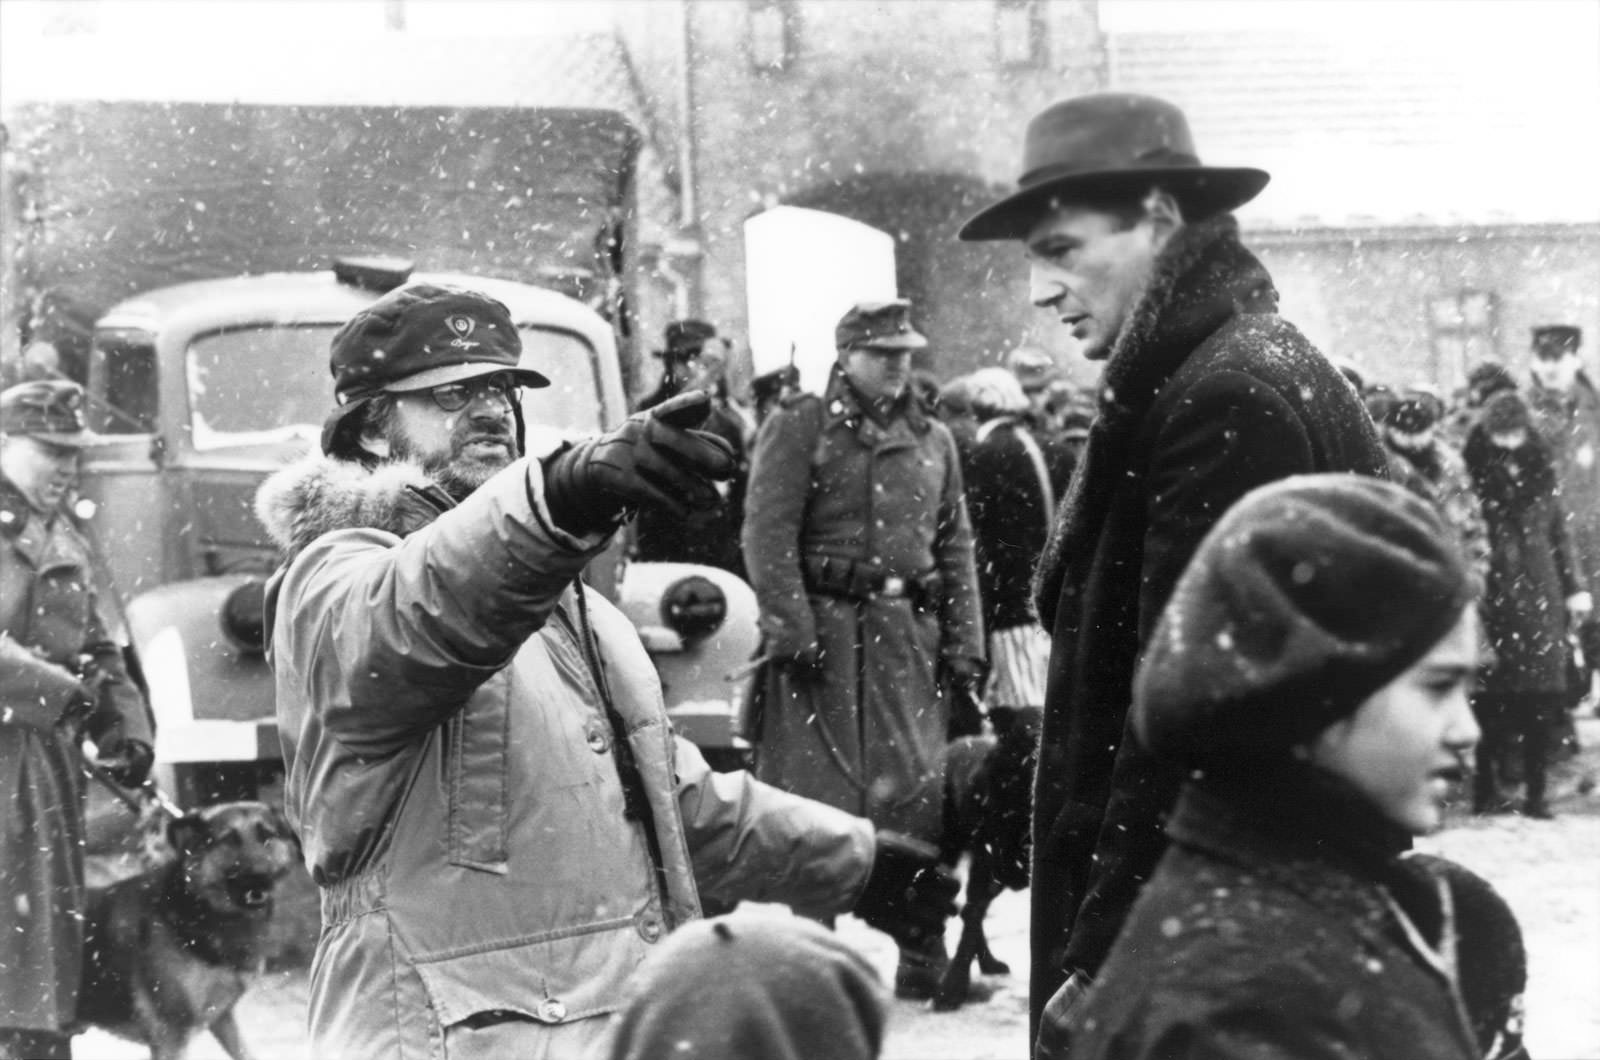 Steven-Spielberg-and-Liam-Neeson-on-the-set-of-Schindlers-List